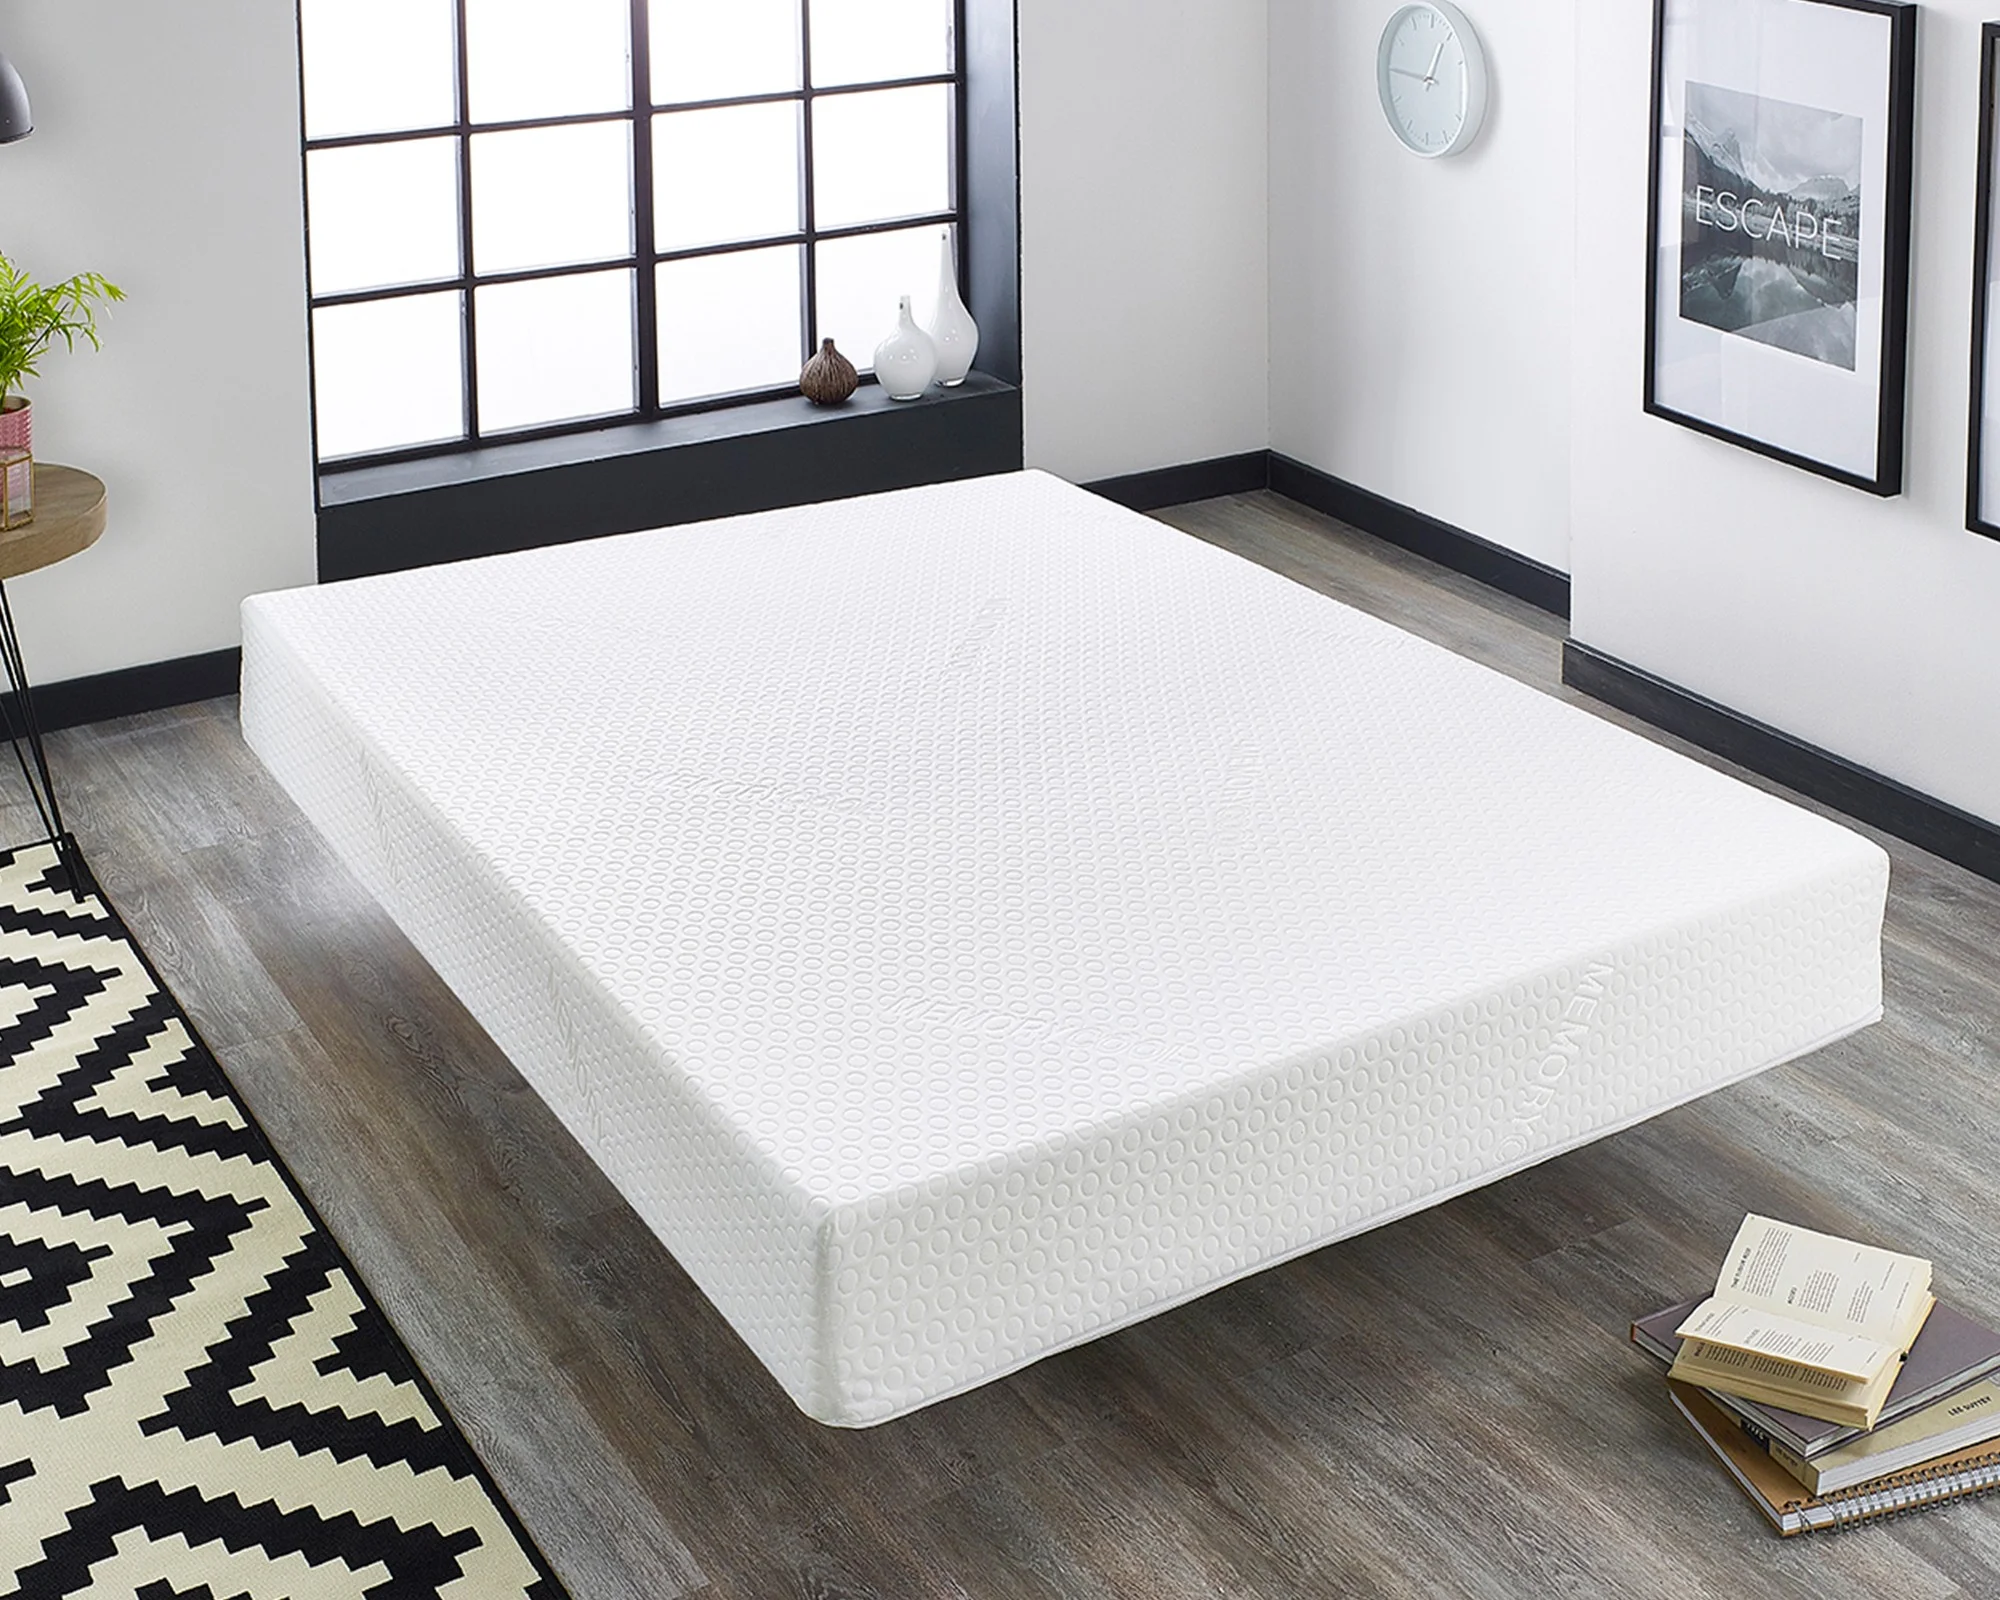 The Essential Guide to Choosing the Right Mattress: Key Considerations for a Restful Slumber